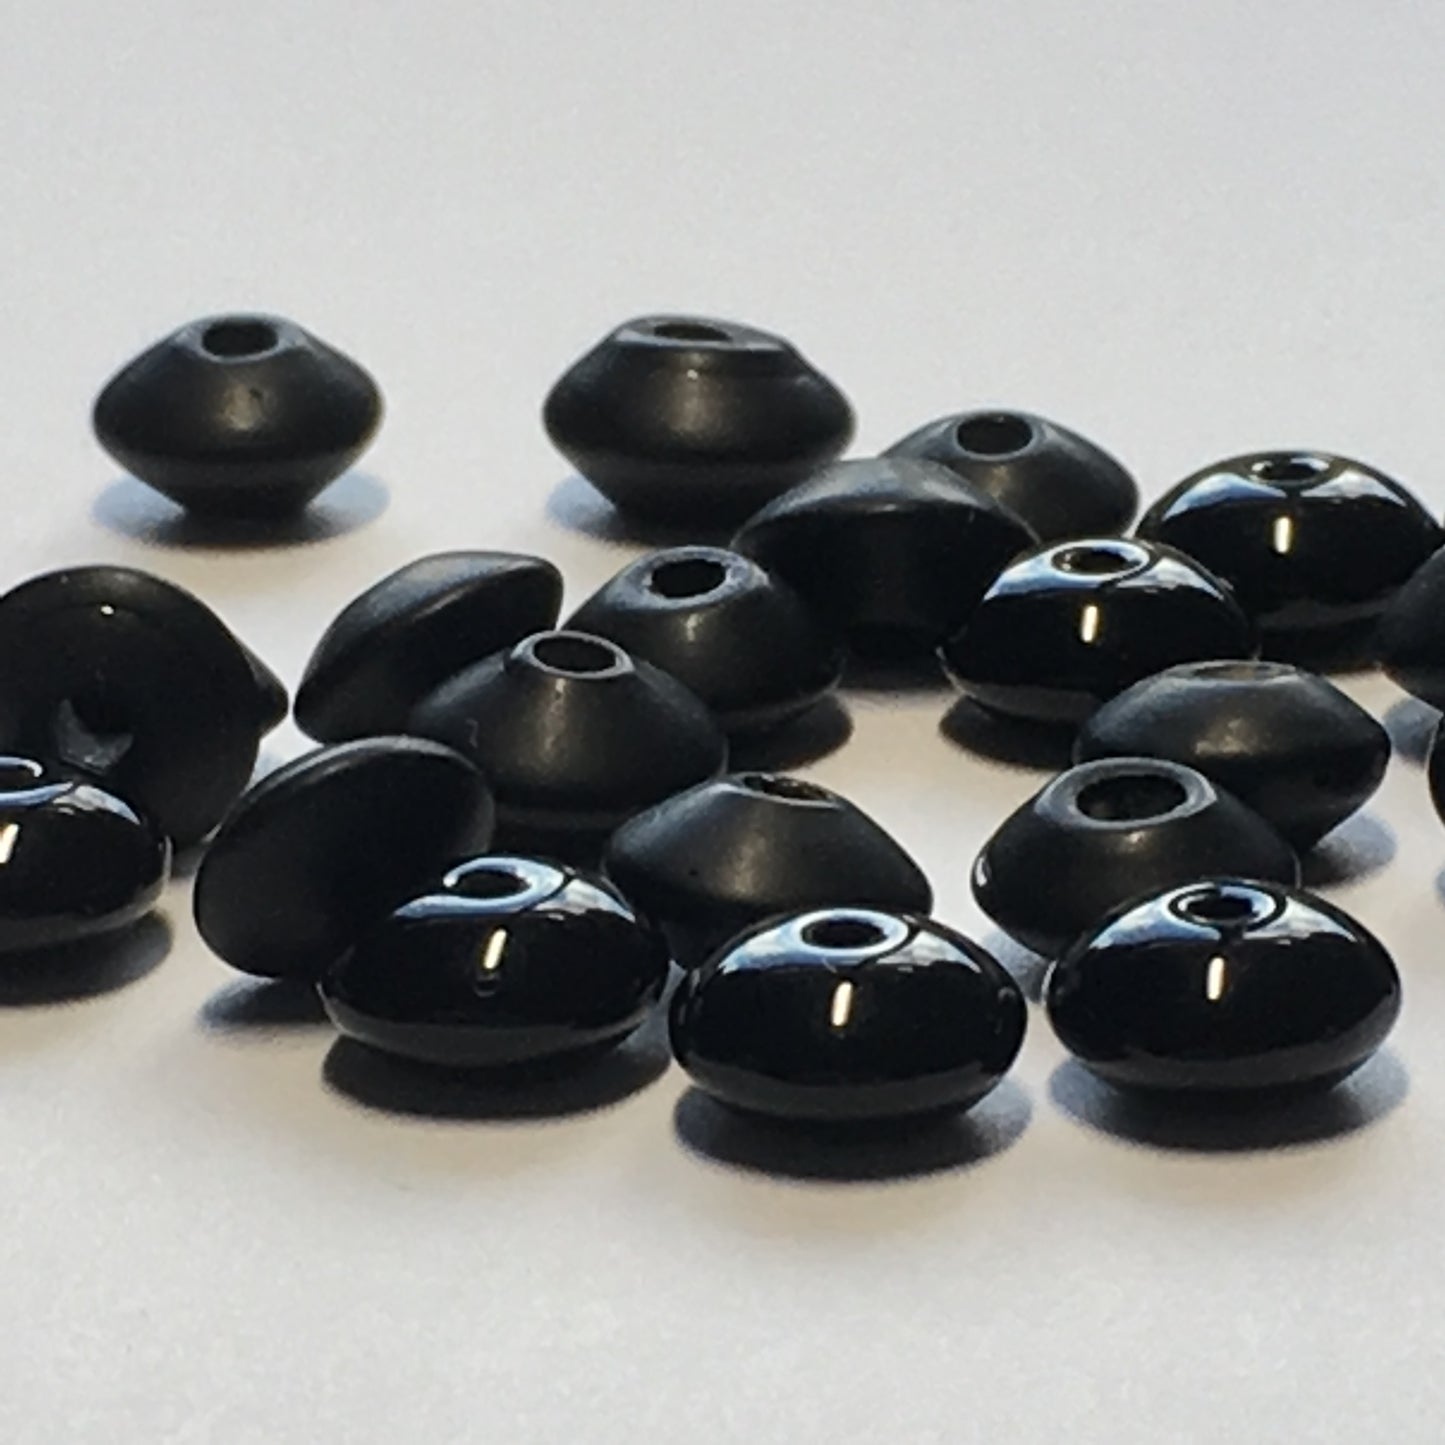 Opaque Jet Black, Glossy and Matte, Lampwork Glass Saucer Beads - 26 Beads